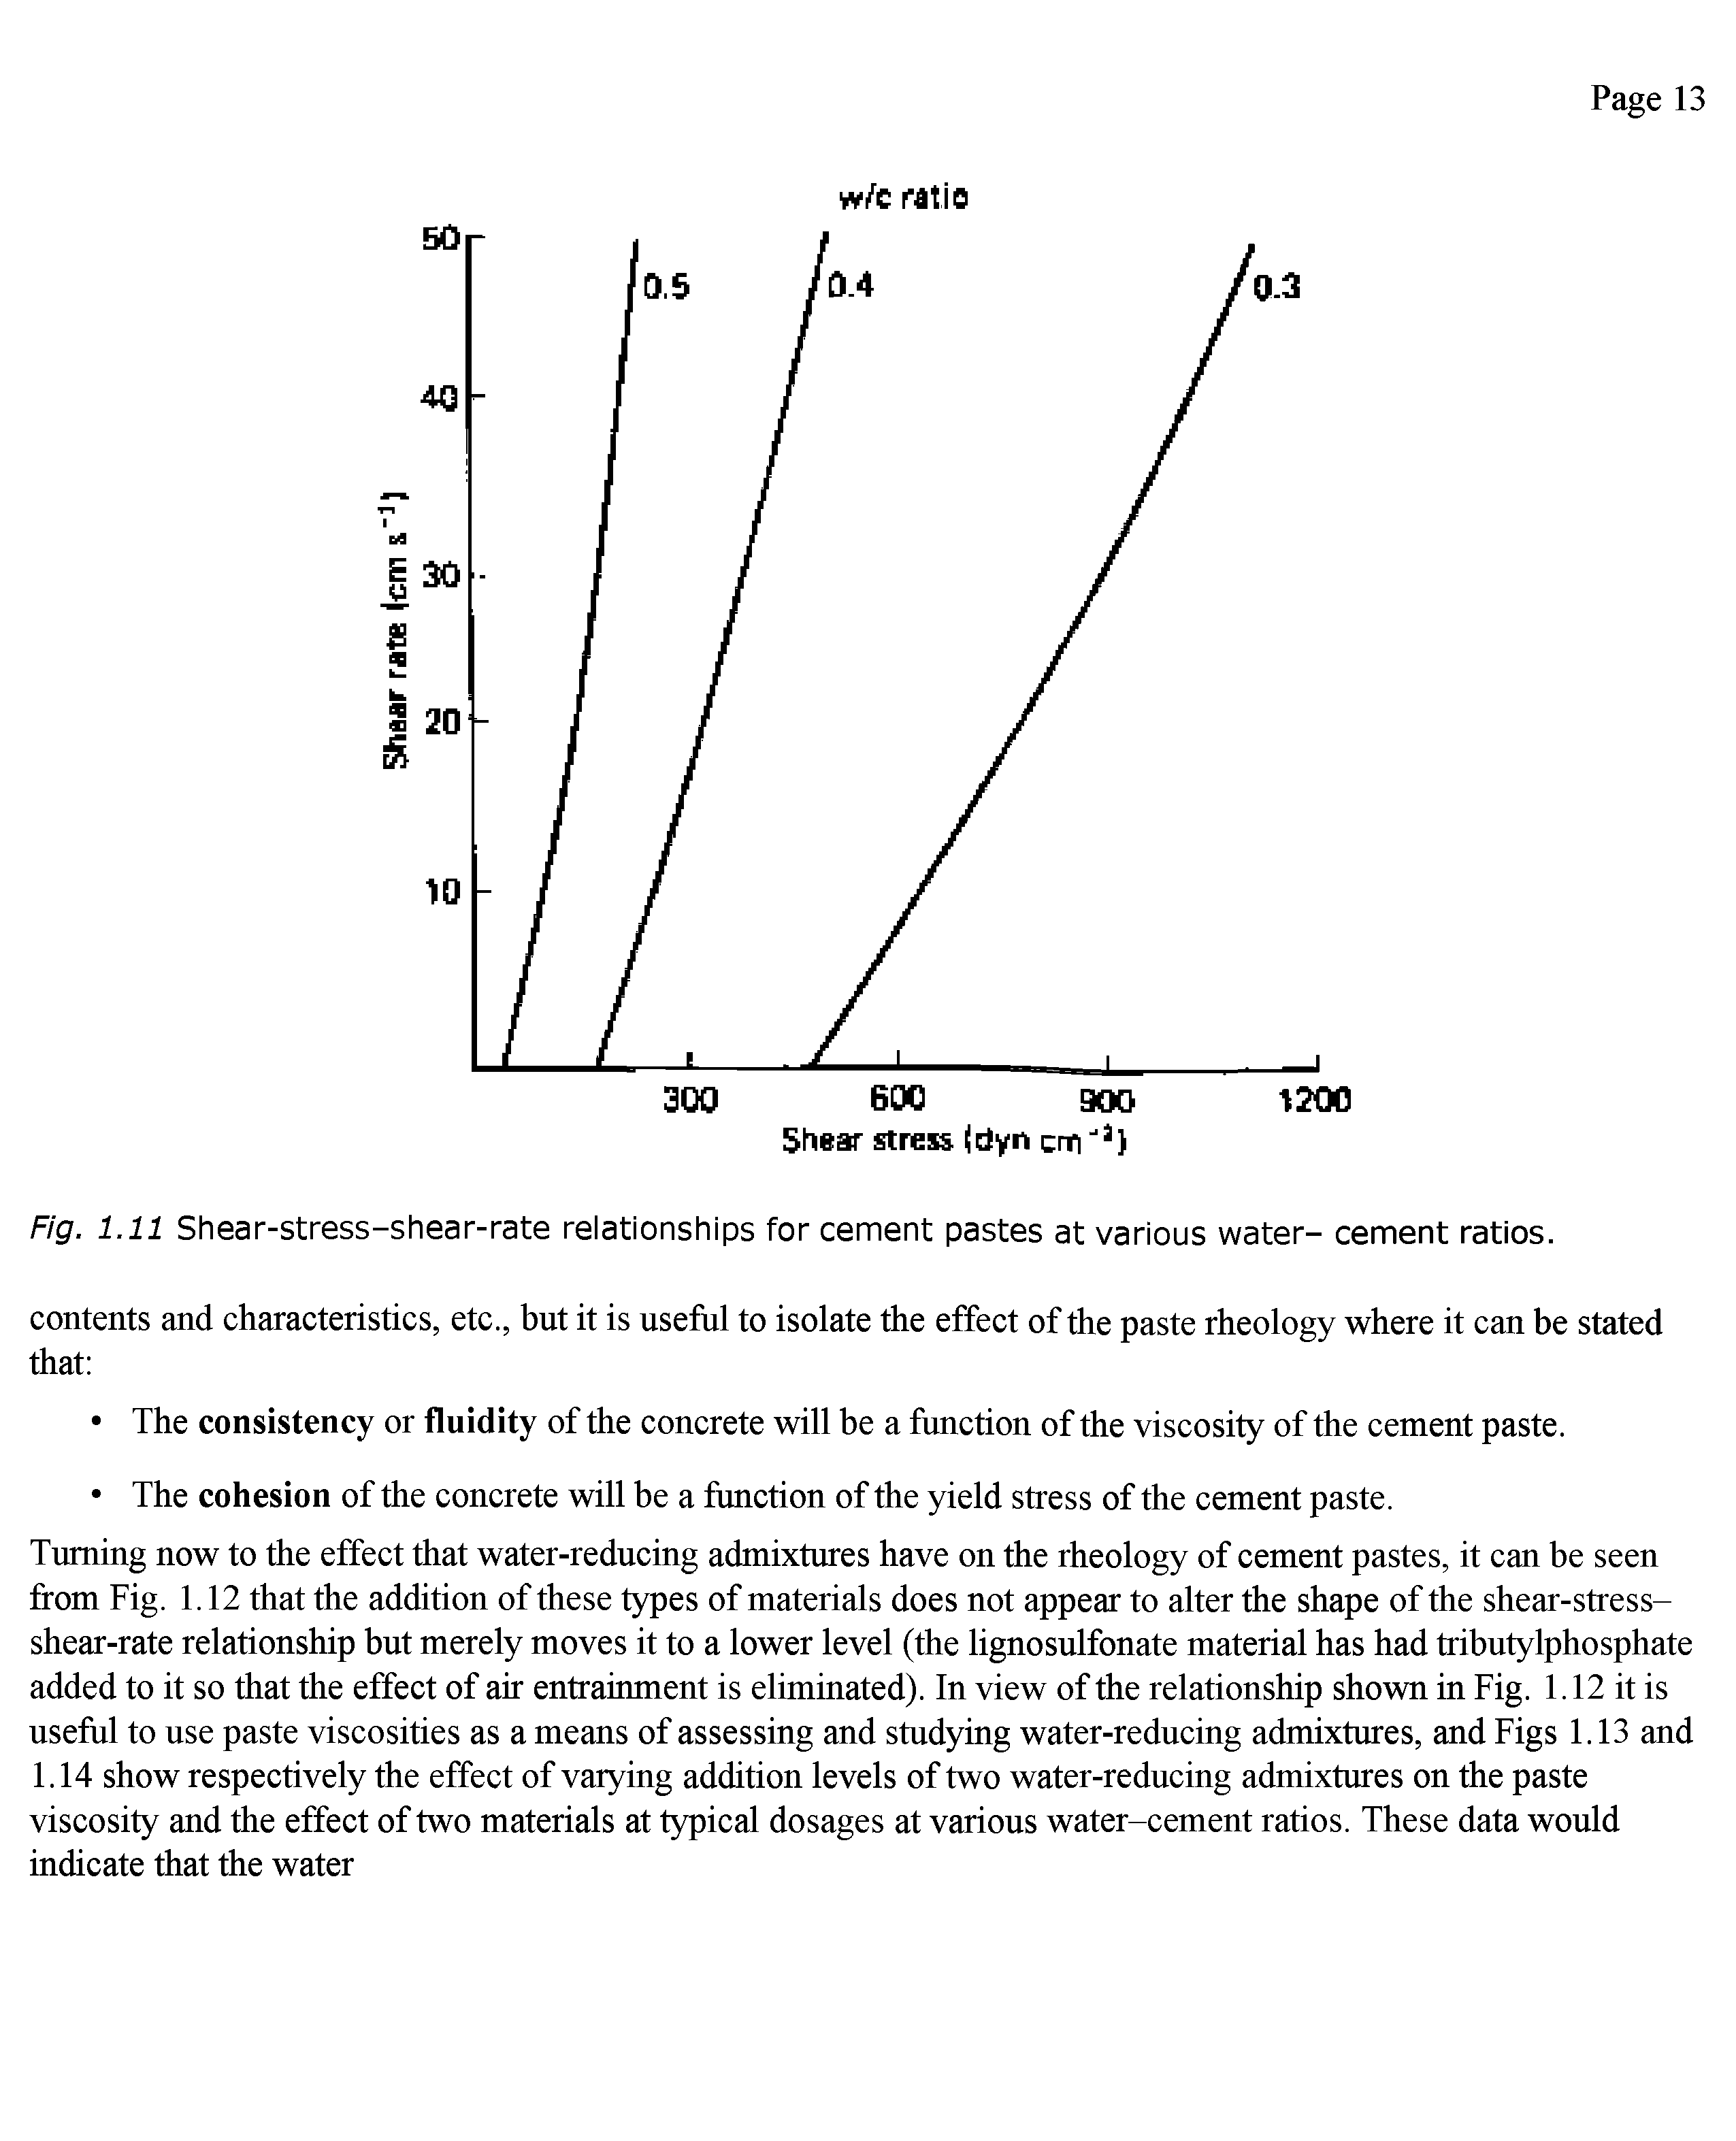 Fig. 1.11 Shear-stress-shear-rate relationships for cement pastes at various water- cement ratios.